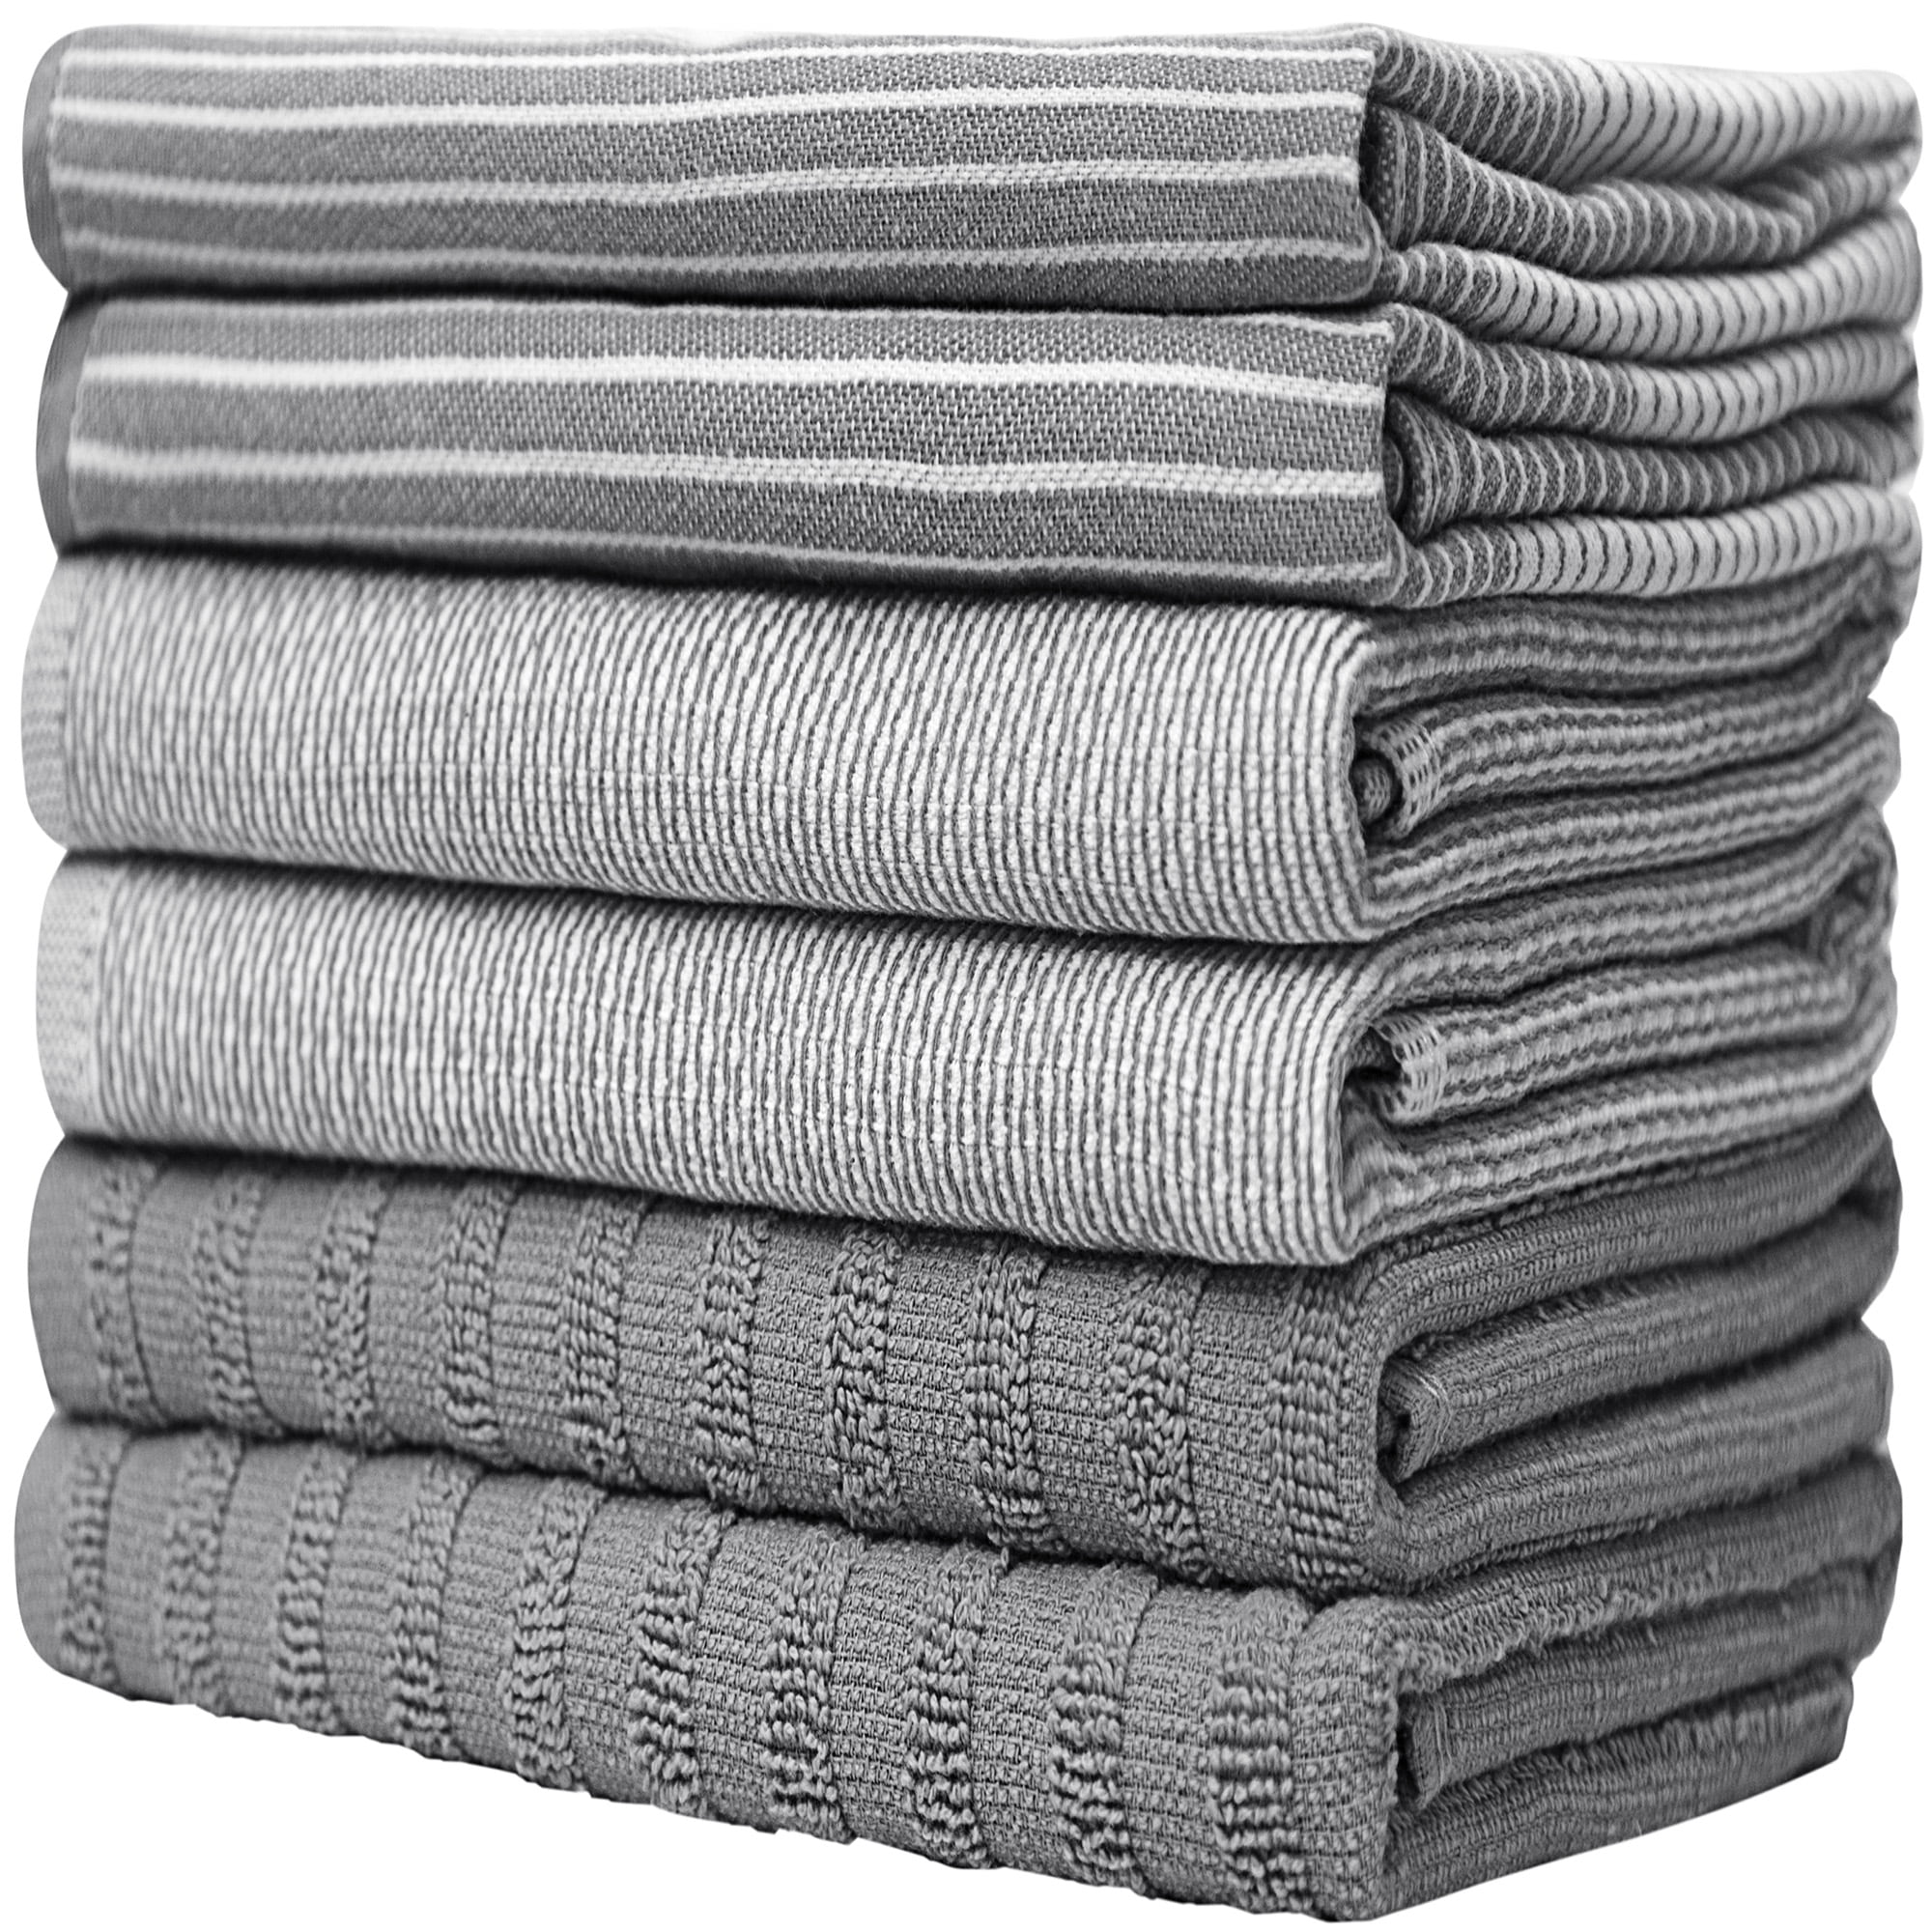 CRAFTSWORTH Kitchen Towels, 15 x 26 Inches, Pack of 6, 400 GSM, 100% Ring  Spun Cotton, Solid & Stripe Grey Dish Towels Super Soft and Absorbent, Tea